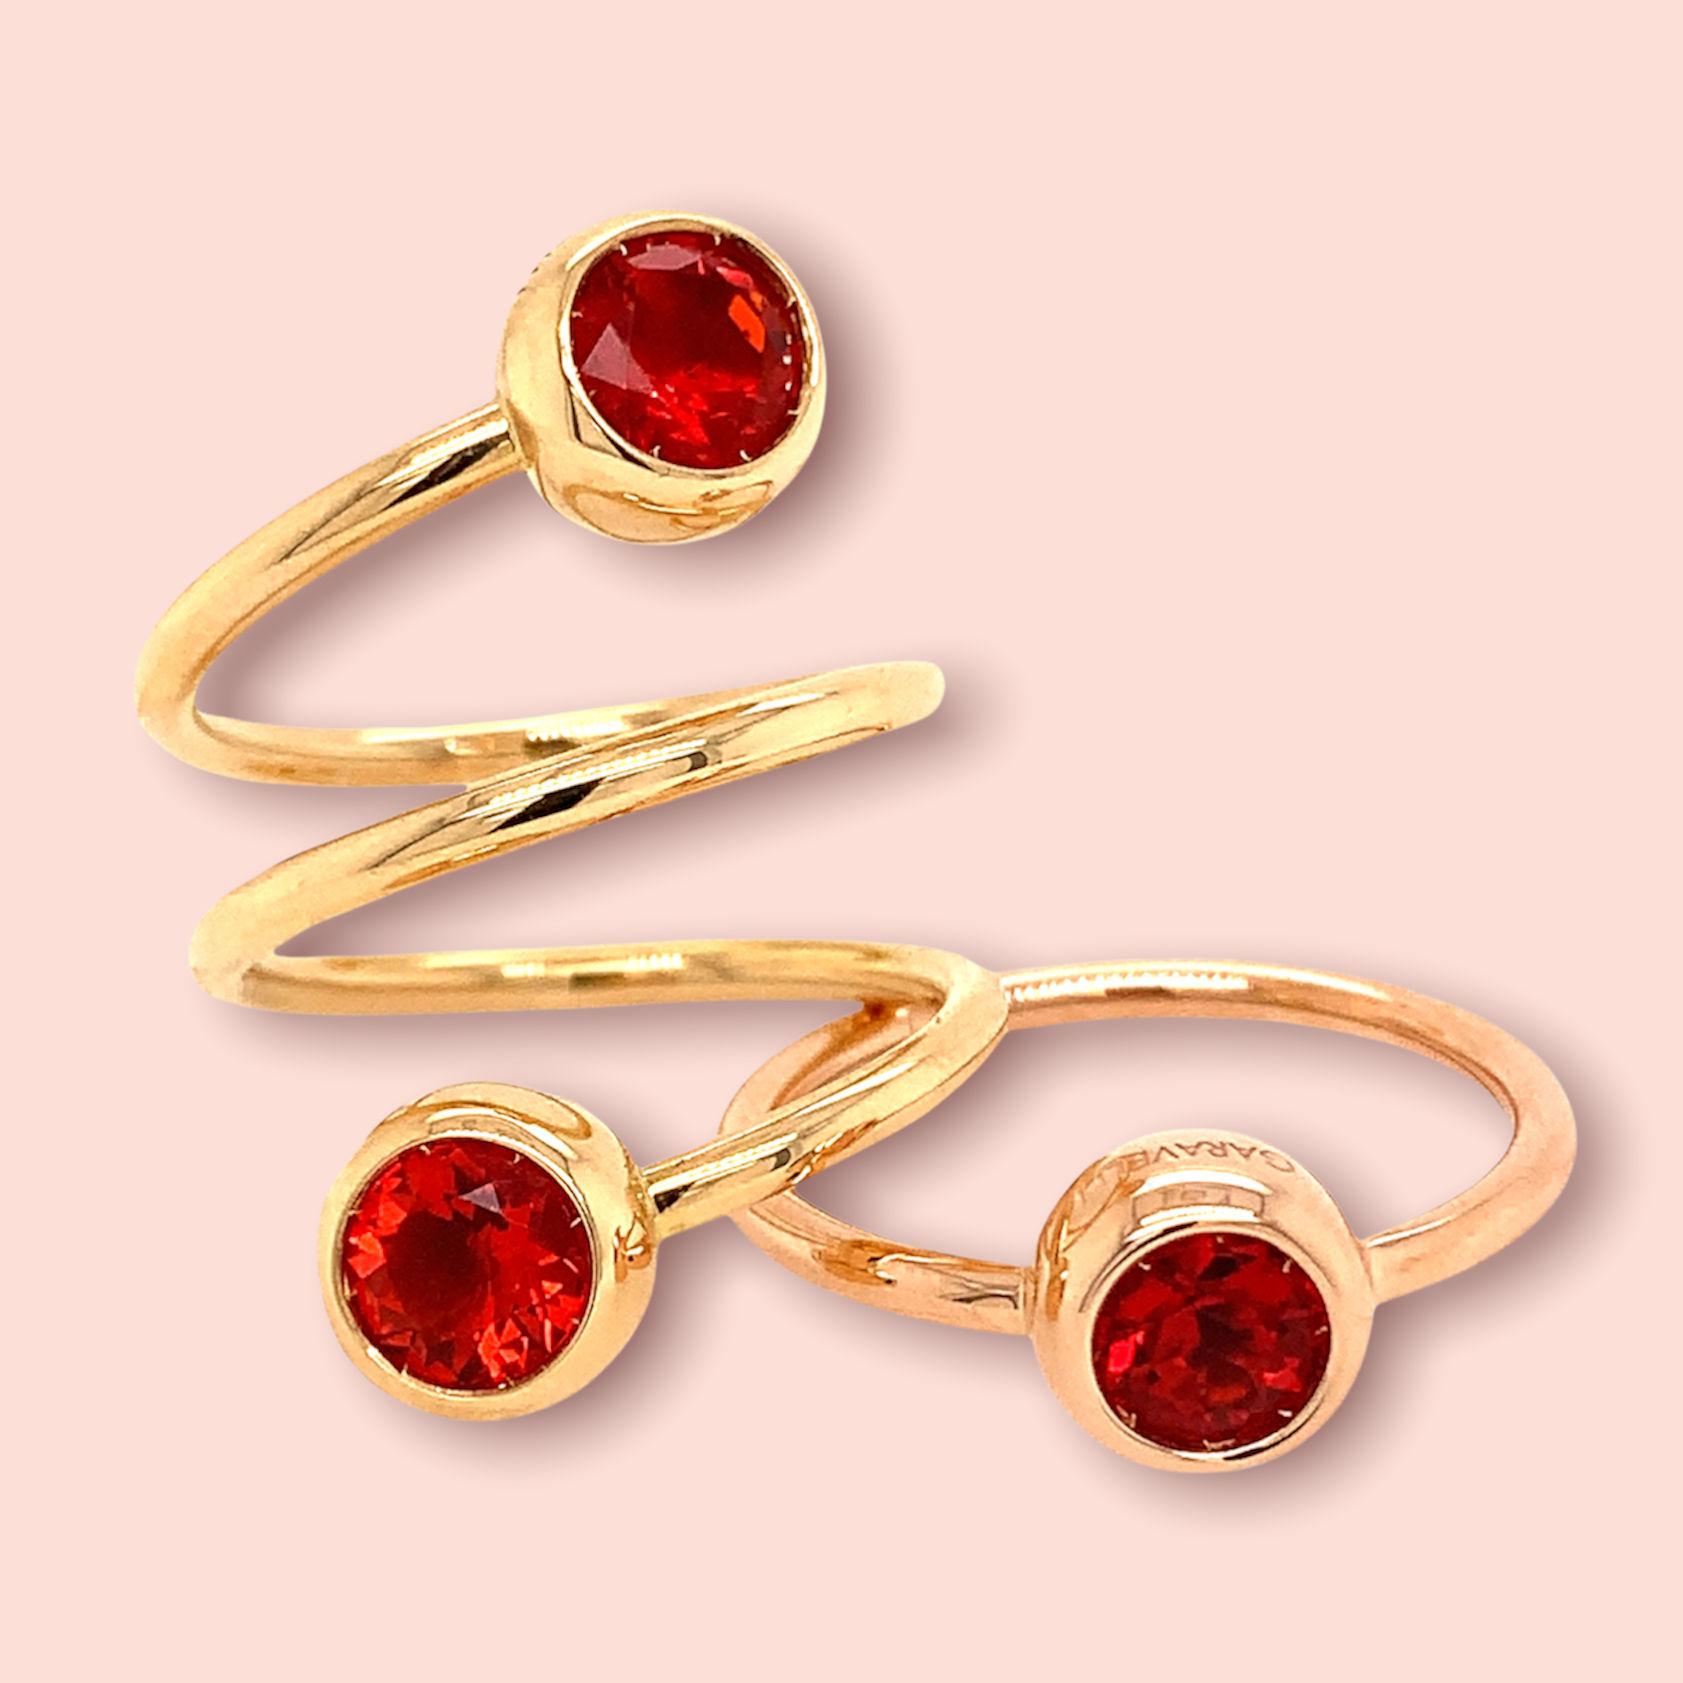 Garavelli 18 Karat Rose Gold Mexican Fire Opal Giotto Collection Ring. Ring size 53.5   
The gold head of the ring is diameter mm 8 height mm 4
The red mexican fire opal is ct :0.65  diameter 6 mm
18KT GOLD  :GR 3.78
Also available necklace or